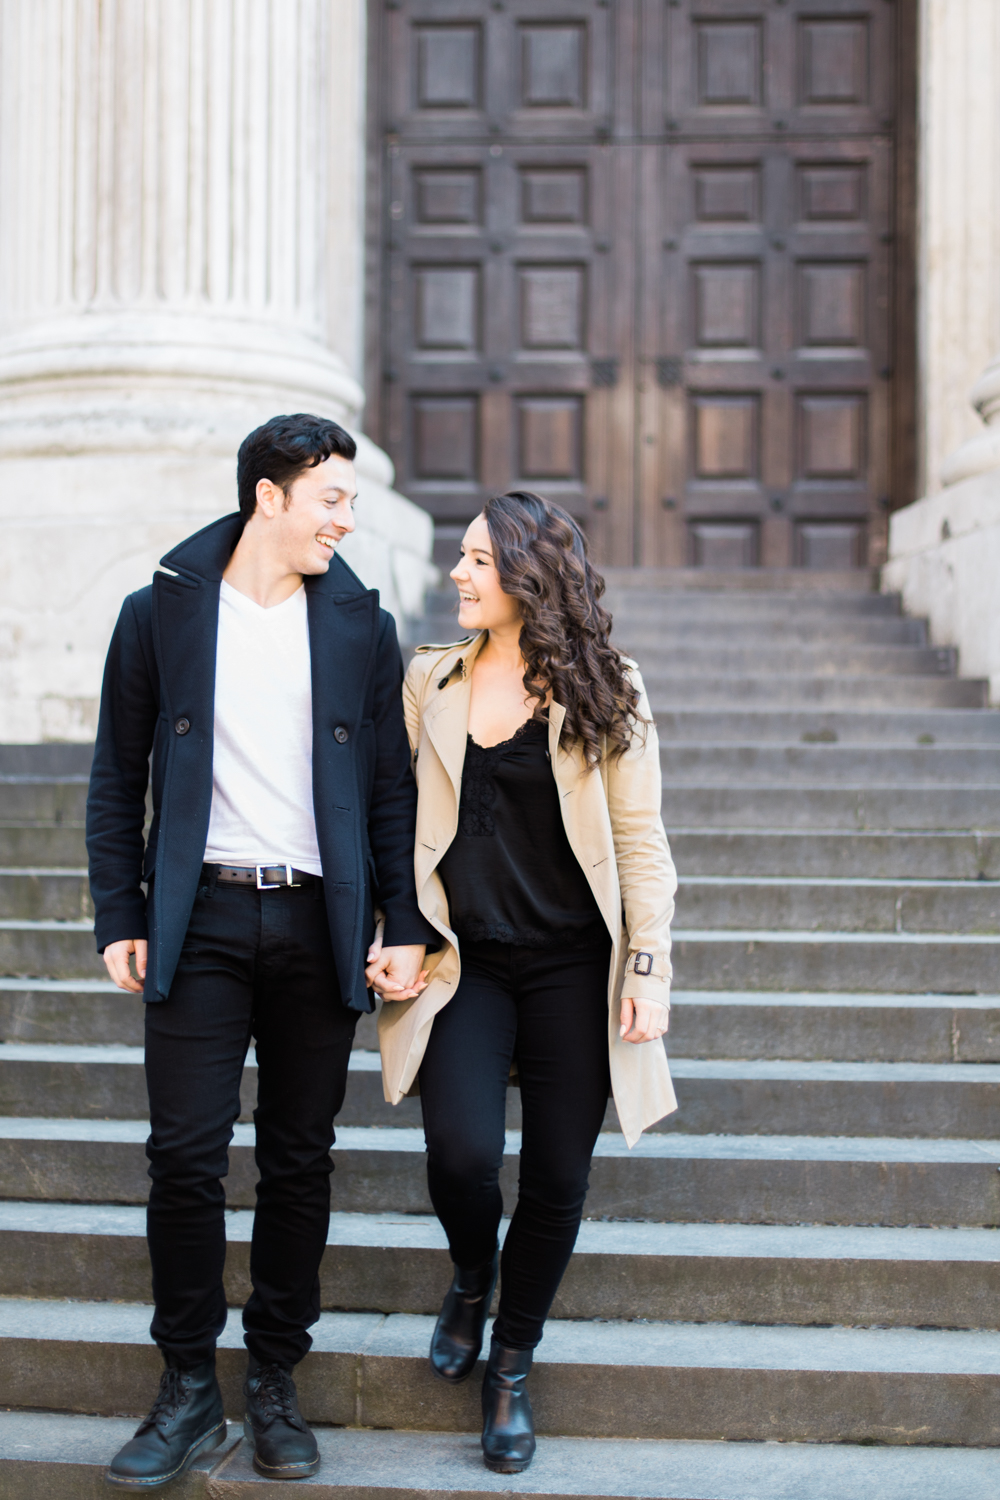 London Spring Engagement Session around St Paul's Cathedral in a fine art photography style.